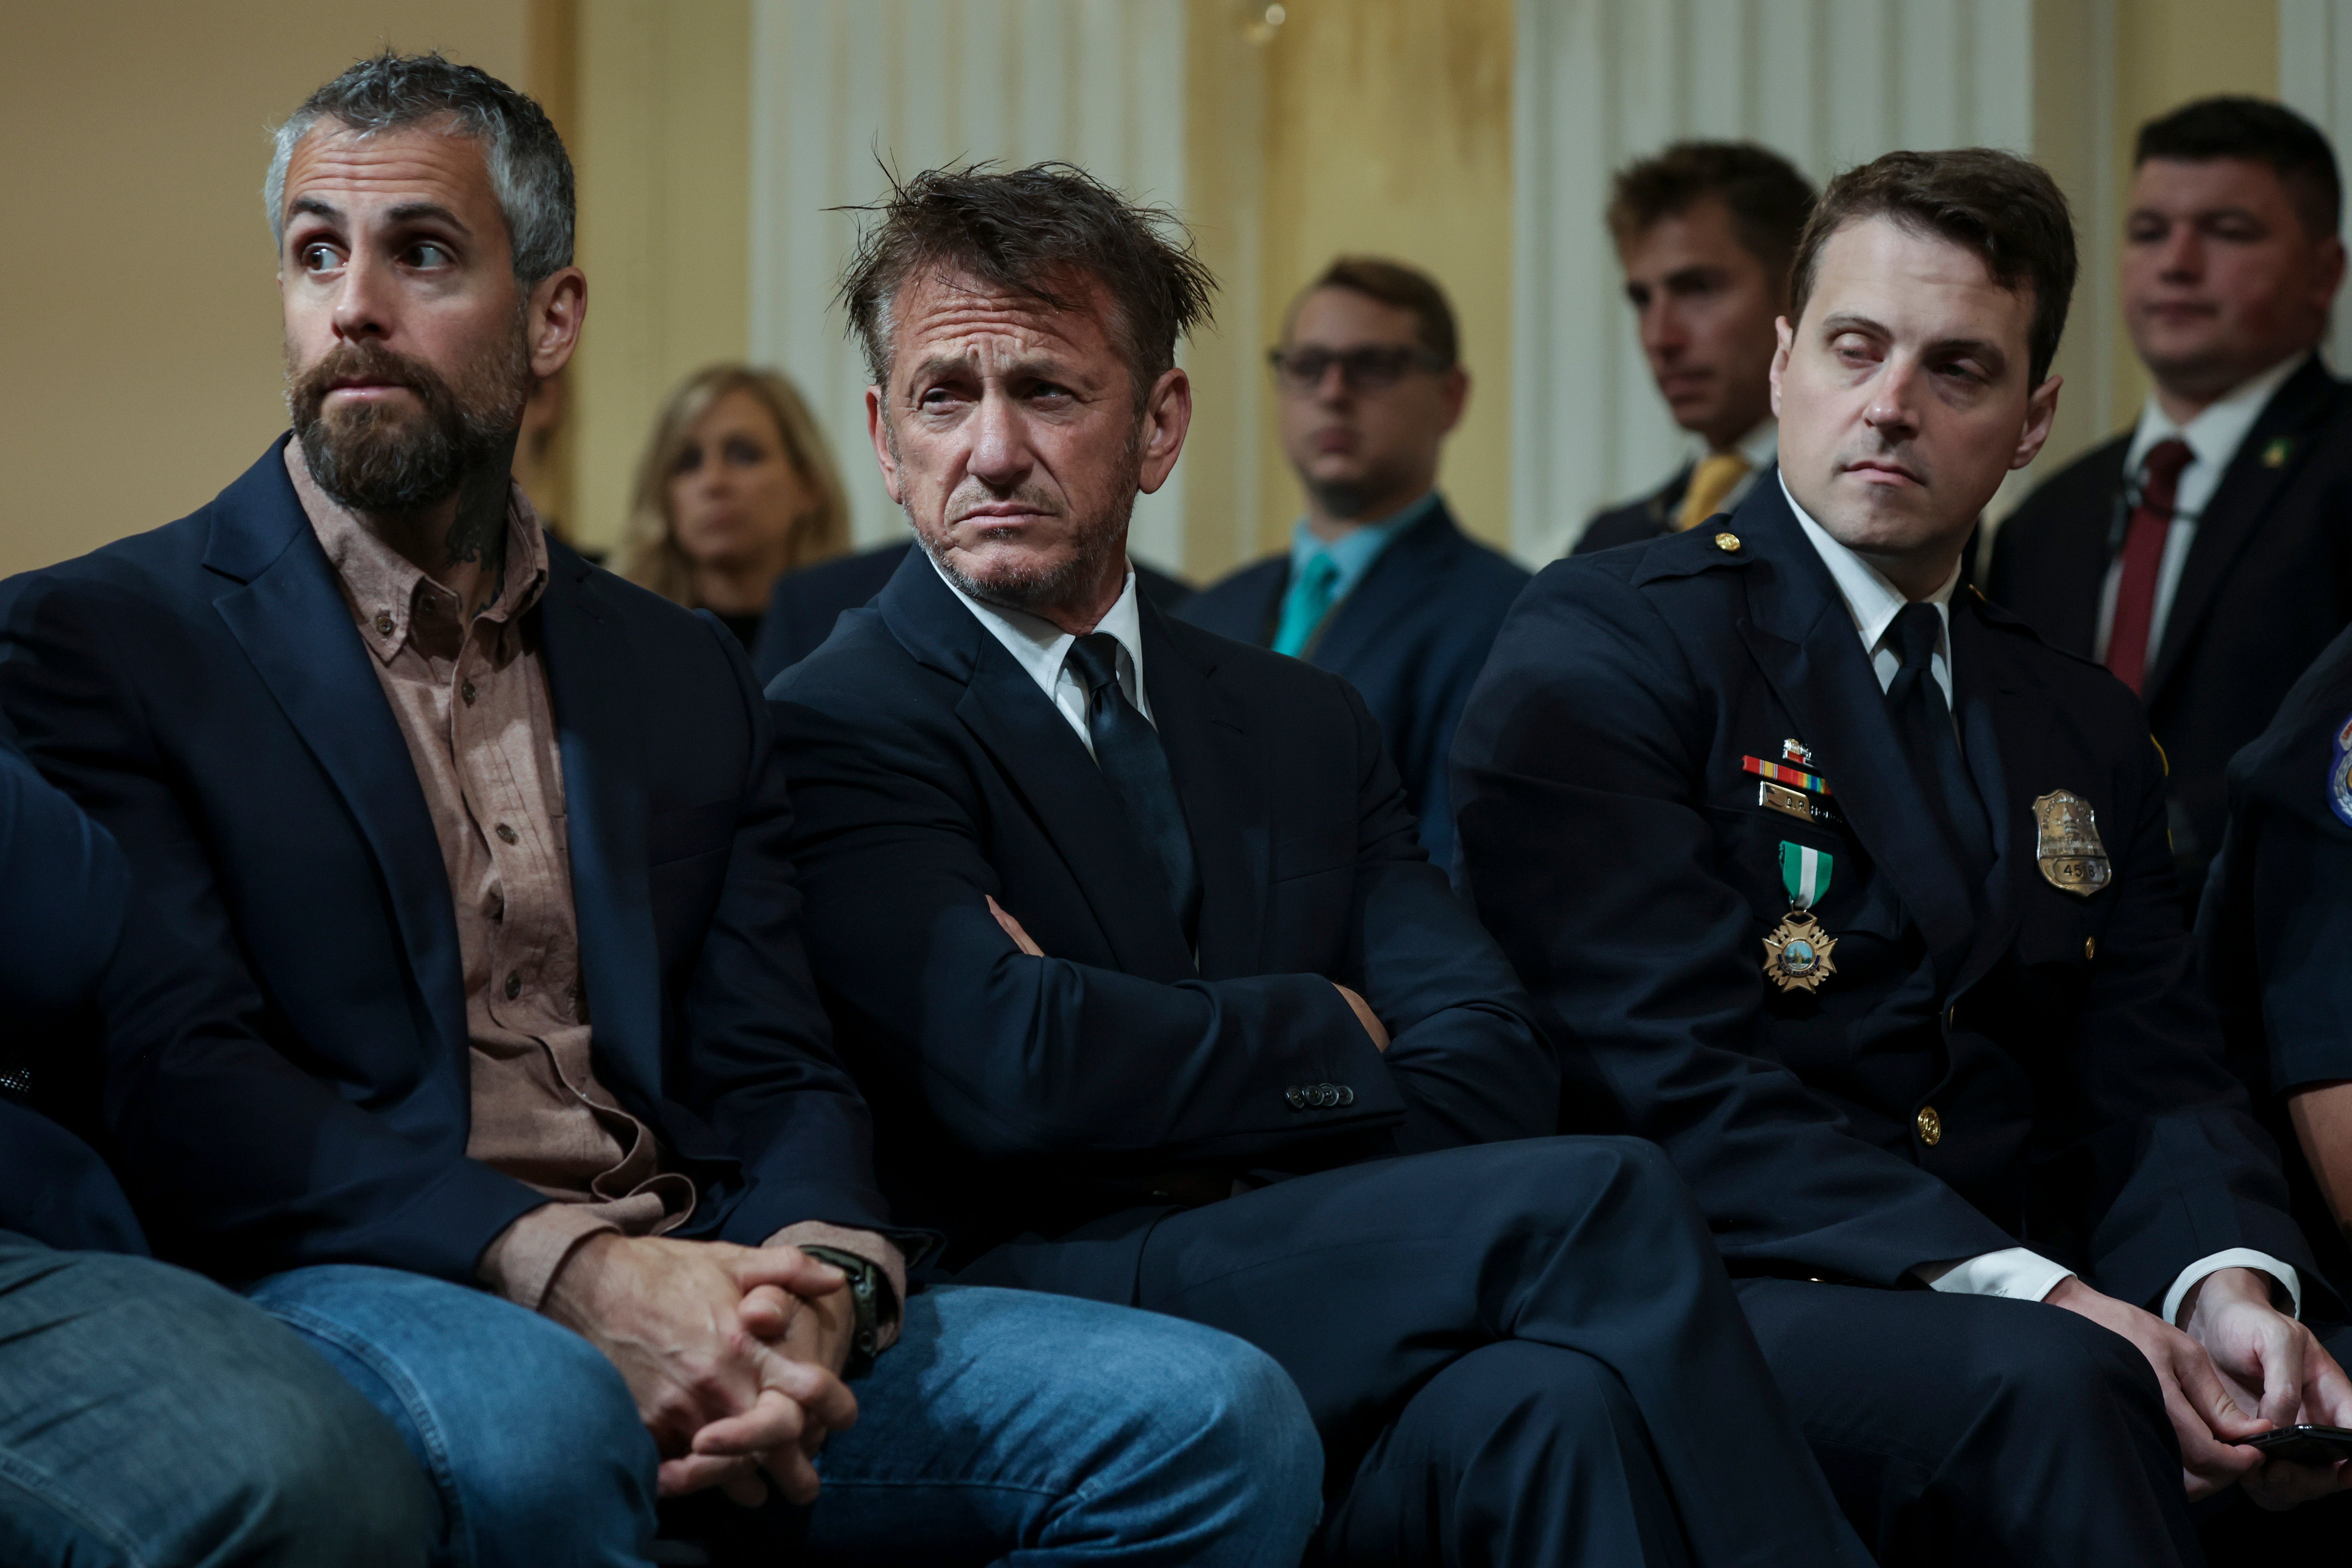 Actor Sean Penn (C) sits with Washington Metropolitan Police Officer Daniel Hodges (R), and retired Metropolitan Police Officer Michael Fanone during Thursday’s House Select Committee